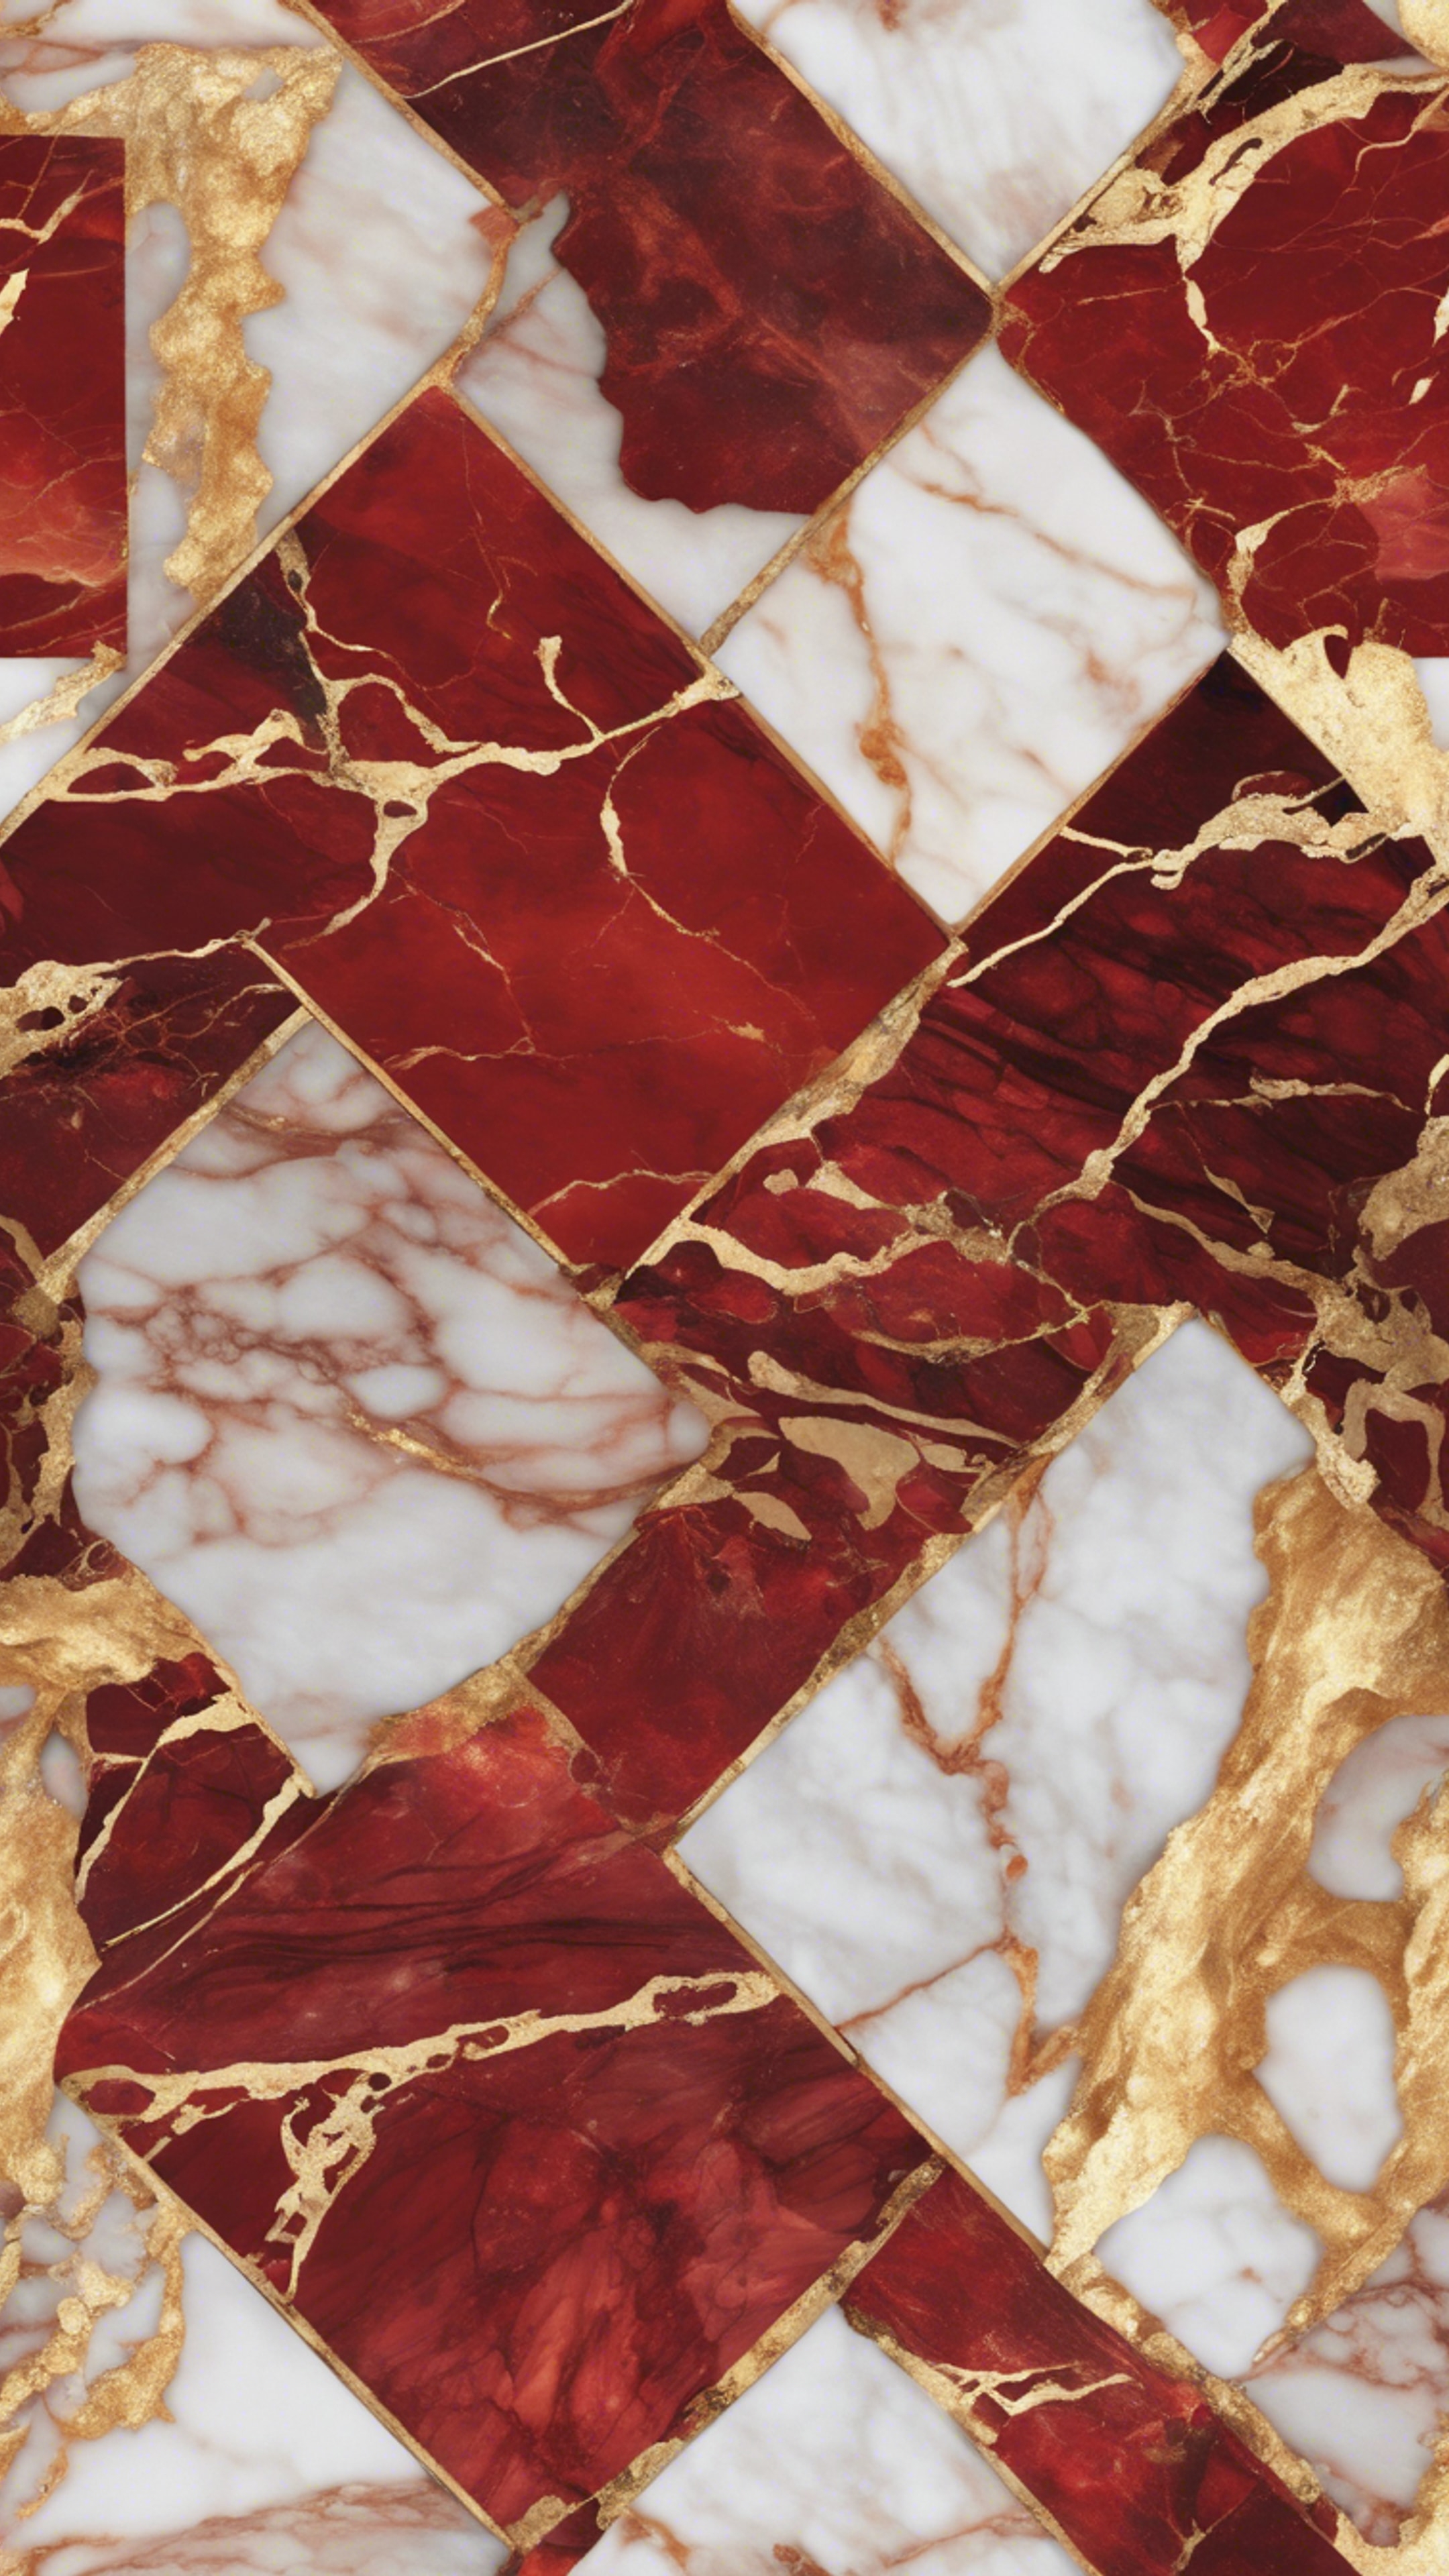 Seamless pattern of red and gold marble resembling the interior of an opulent mansion. Wallpaper[0c55d253d85d467eb81b]